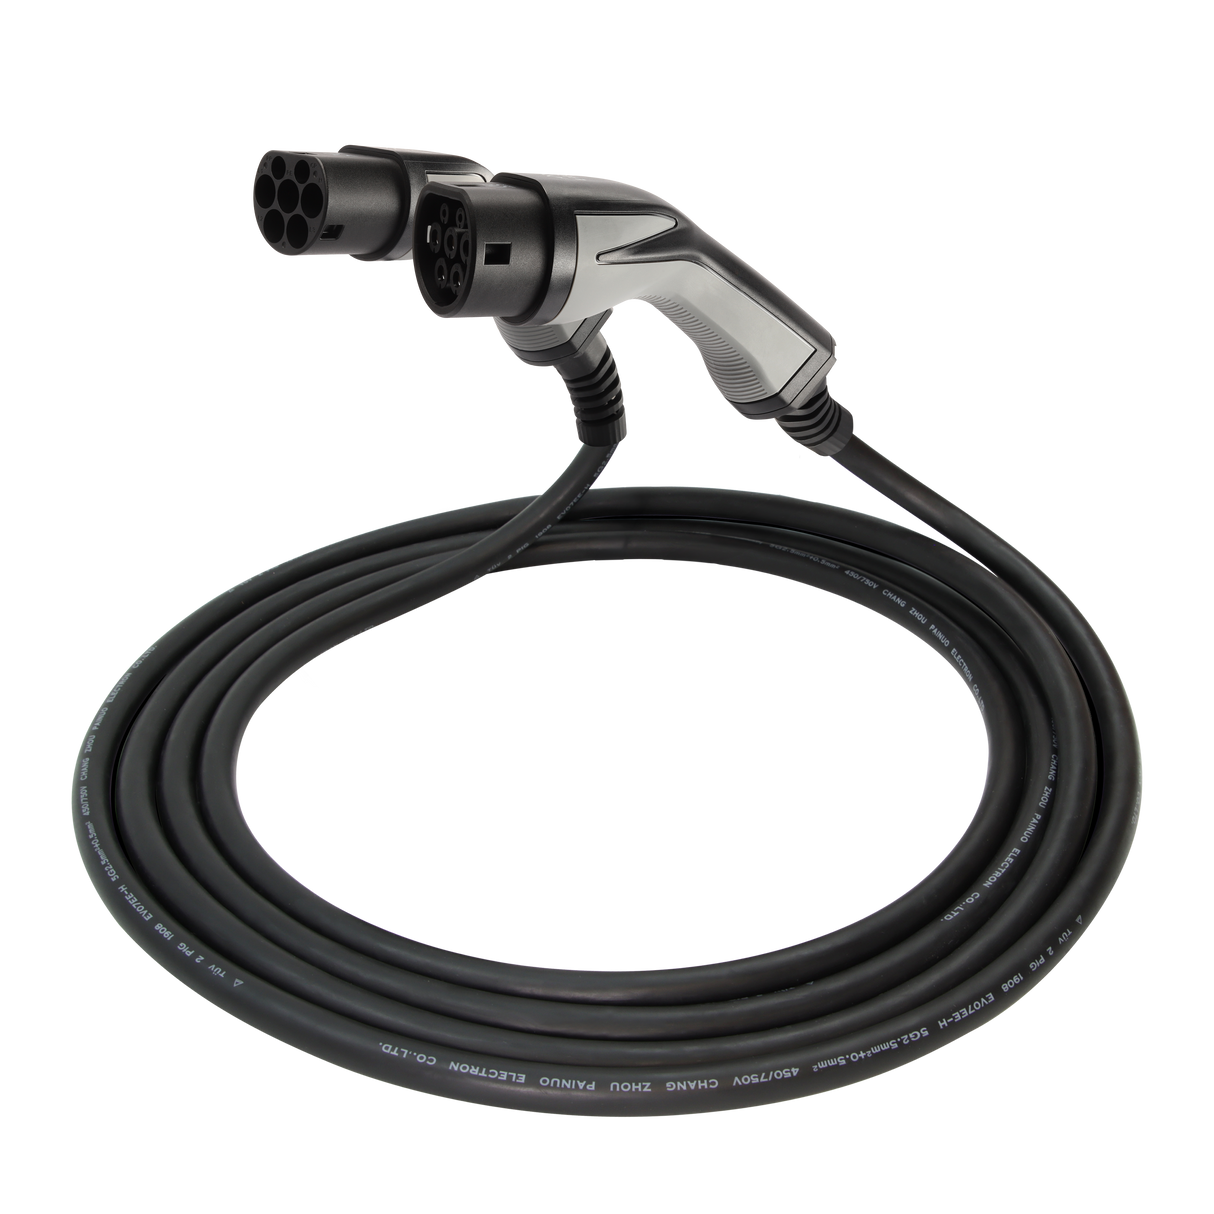 Charging cable Porsche Cayenne - Erock Pro Type 2 - 16A 1 phase (3.7 kW)